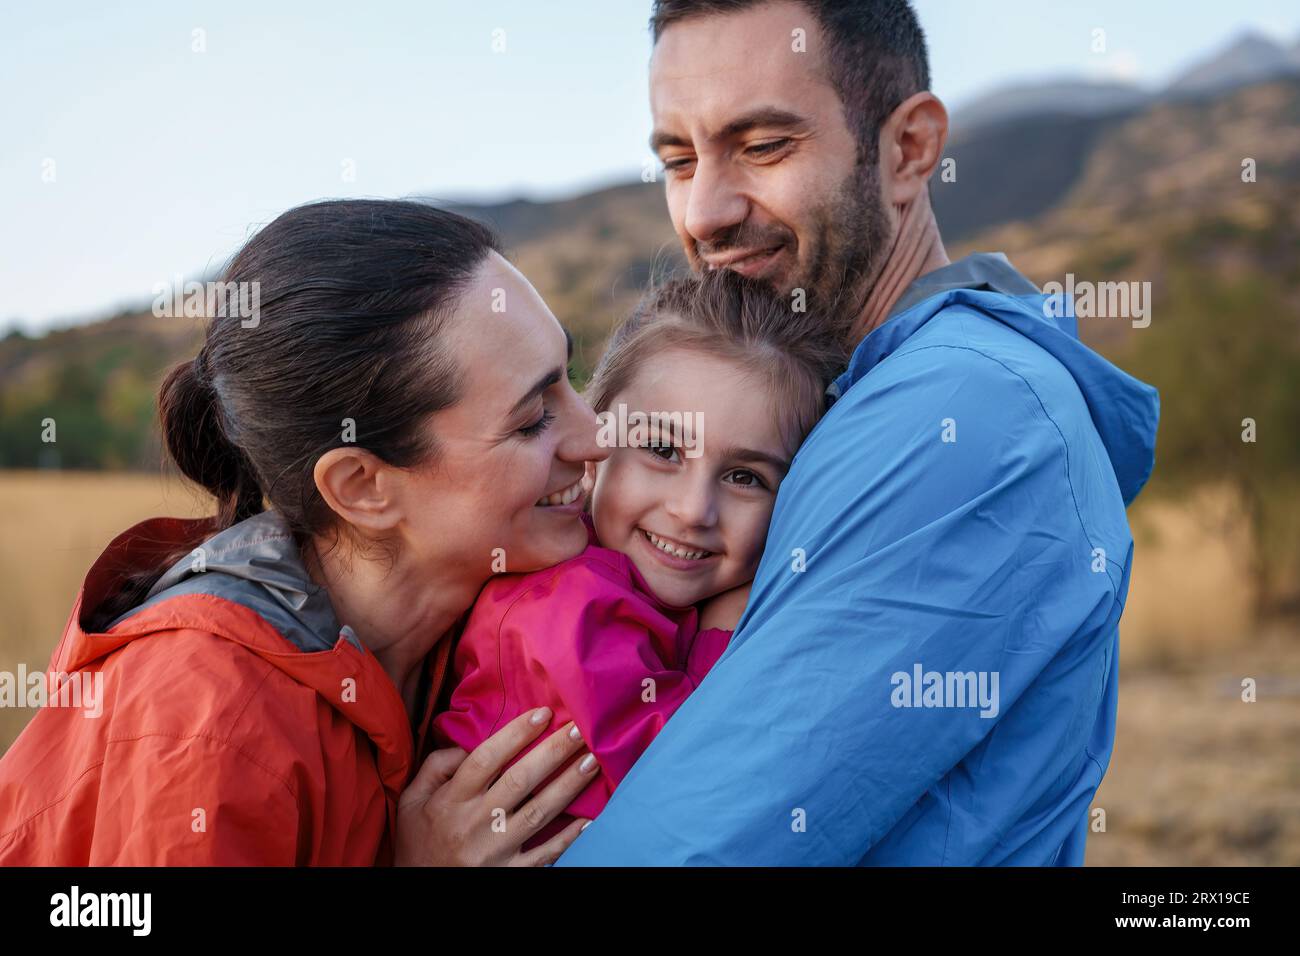 Mediterranean Family Moment in Mountains: A loving father and mother cuddle their attentive daughter during an outdoor mountain adventure, as she look Stock Photo